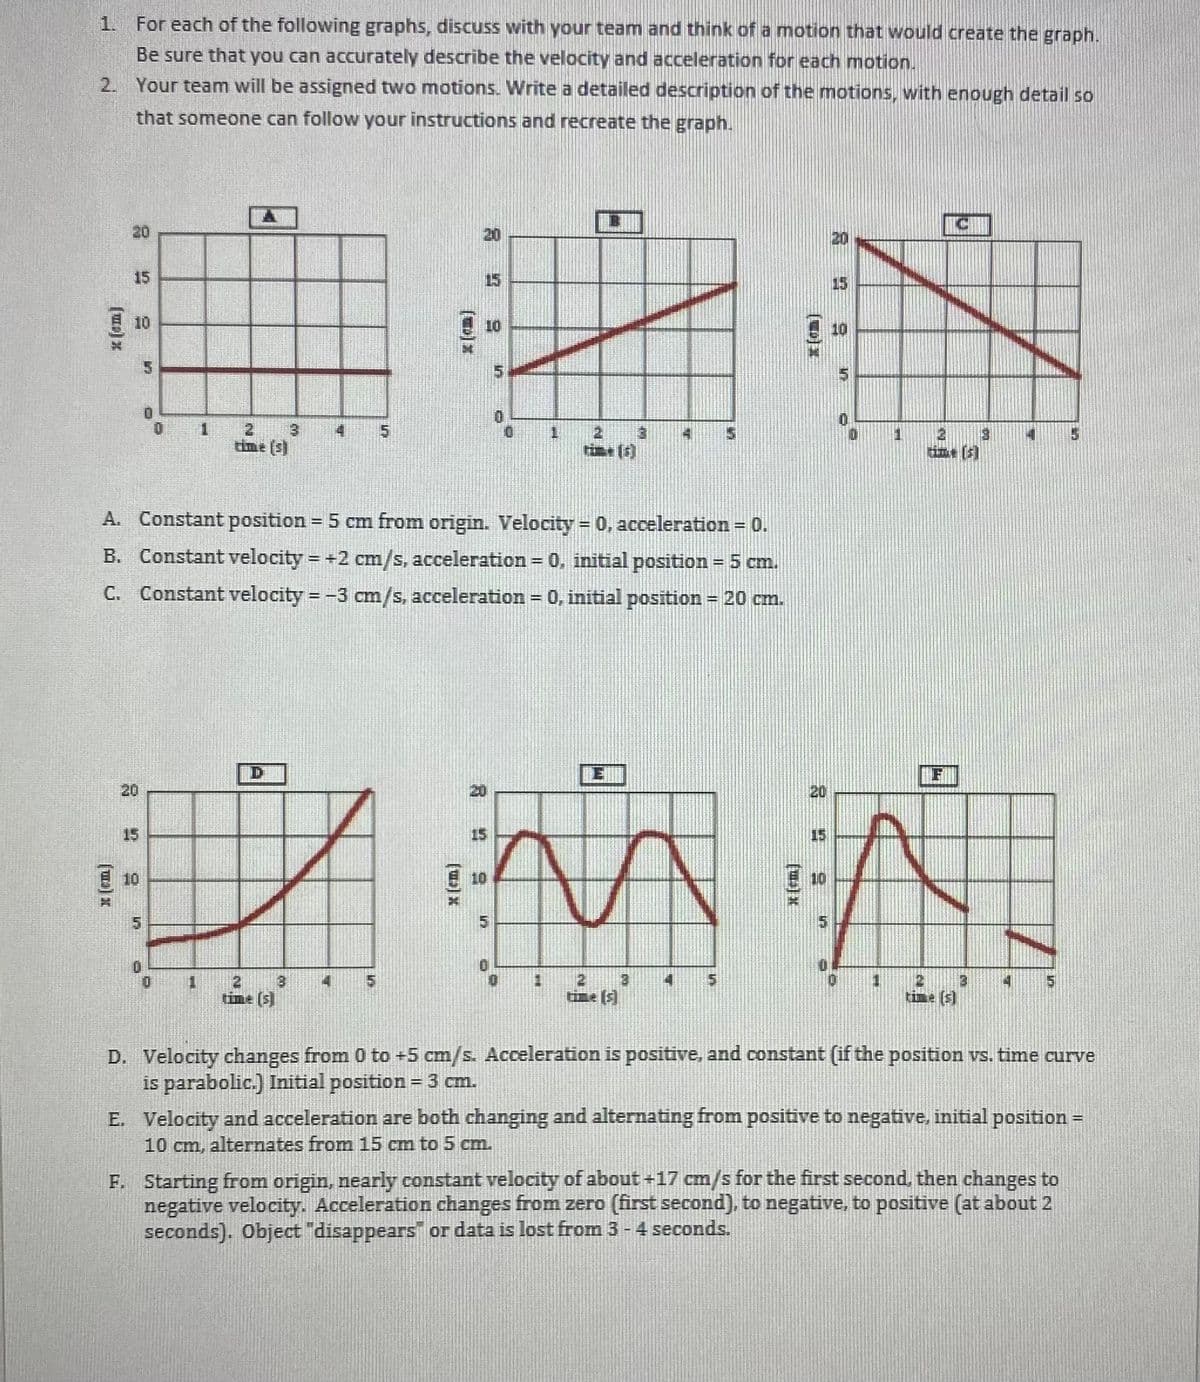 1. For each of the following graphs, discuss with your team and think of a motion that would create the graph.
Be sure that you can accurately describe the velocity and acceleration for each motion.
2. Your team will be assigned two motions. Write a detailed description of the motions, with enough detail so
that someone can follow your instructions and recreate the graph.
20
15
10
time (s)
A. Constant position = 5 cm from origin. Velocity = 0, acceleration = 0.
B. Constant velocity = +2 cm/s, acceleration = 0, initial position = 5 cm.
C. Constant velocity = -3 cm/s, acceleration 0, initial position = 20 cm.
%3D
20
15
15
E 10
10
21
12
tim: (5)
D. Velocity changes from 0 to +5 cm/s. Acceleration is positive, and constant (if the position vs. time curve
is parabolic.) Initial position = 3 cm.
E. Velocity and acceleration are both changing and alternating from positive to negative, initial position =
10 cm, alternates from 15 cm to 5 cm.
F. Starting from origin, nearly constant velocity of about+17 cm/s for the first second, then changes to
negative velocity. Acceleration changes from zero (first second), to negative, to positive (at about 2
seconds). Object "disappears or data is lost from 3 -4 seconds.
* (sm)
富
